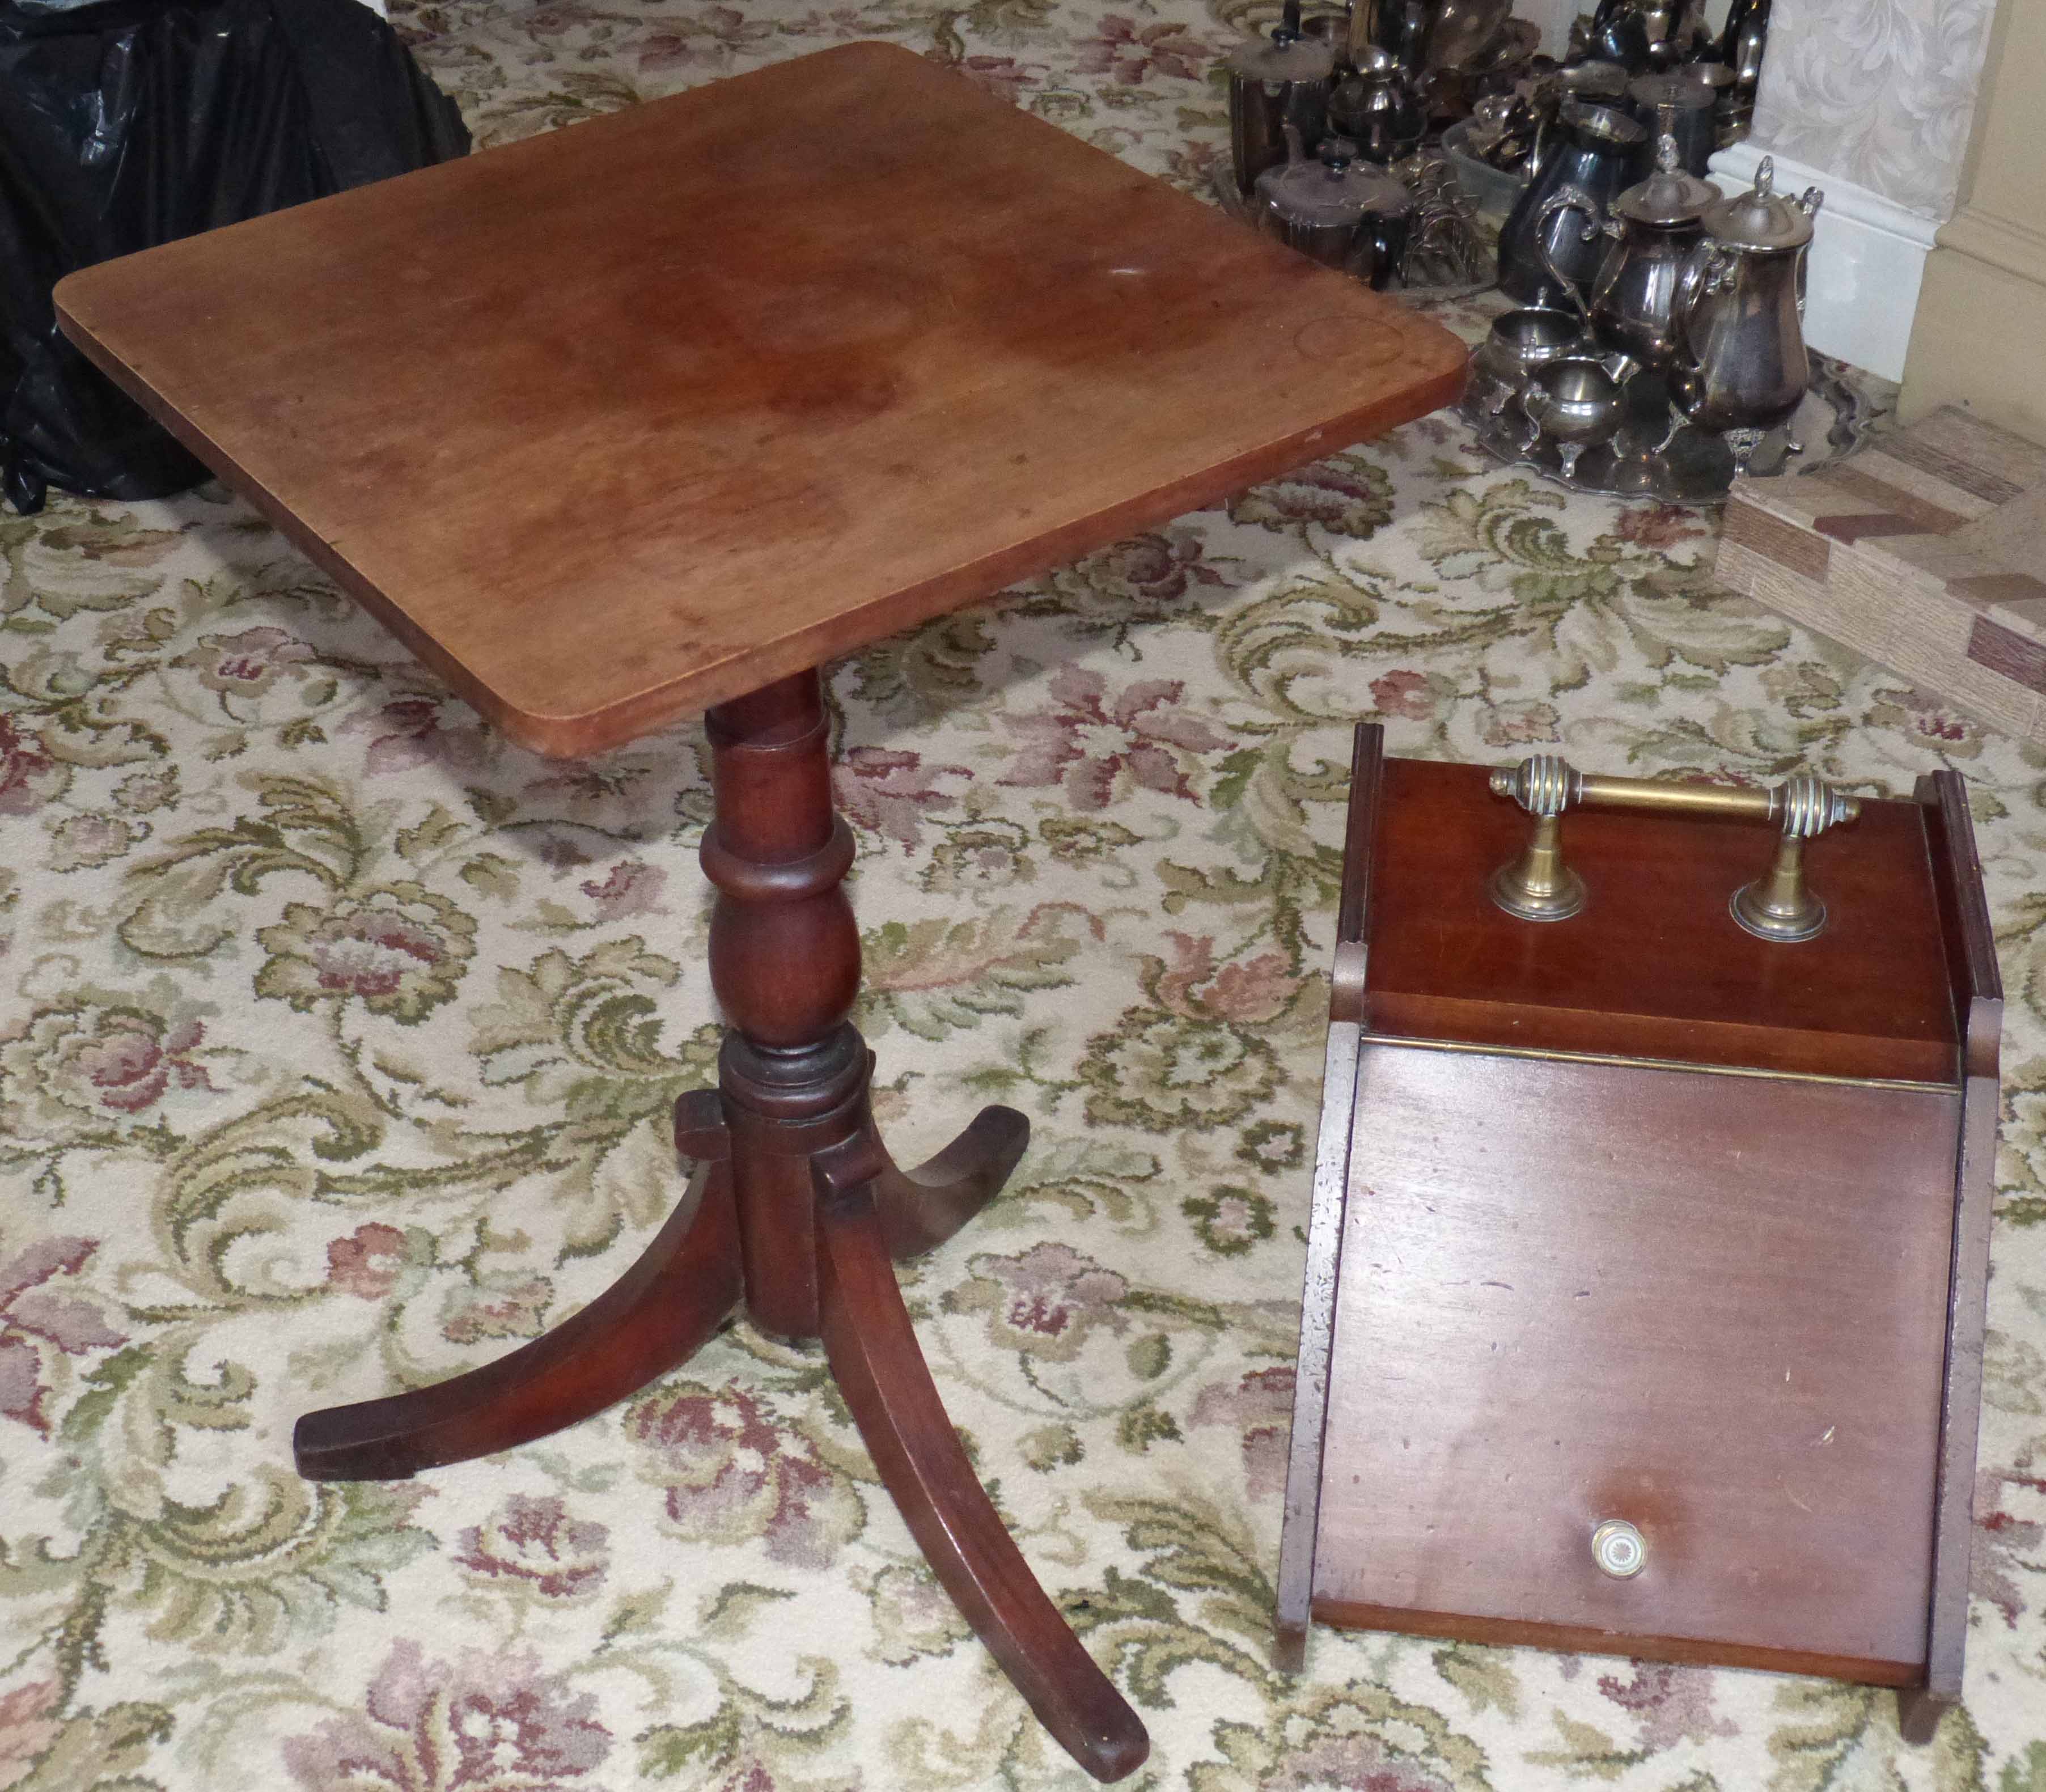 19th century mahogany tripod table and purdonium. Condition reports are not available for the